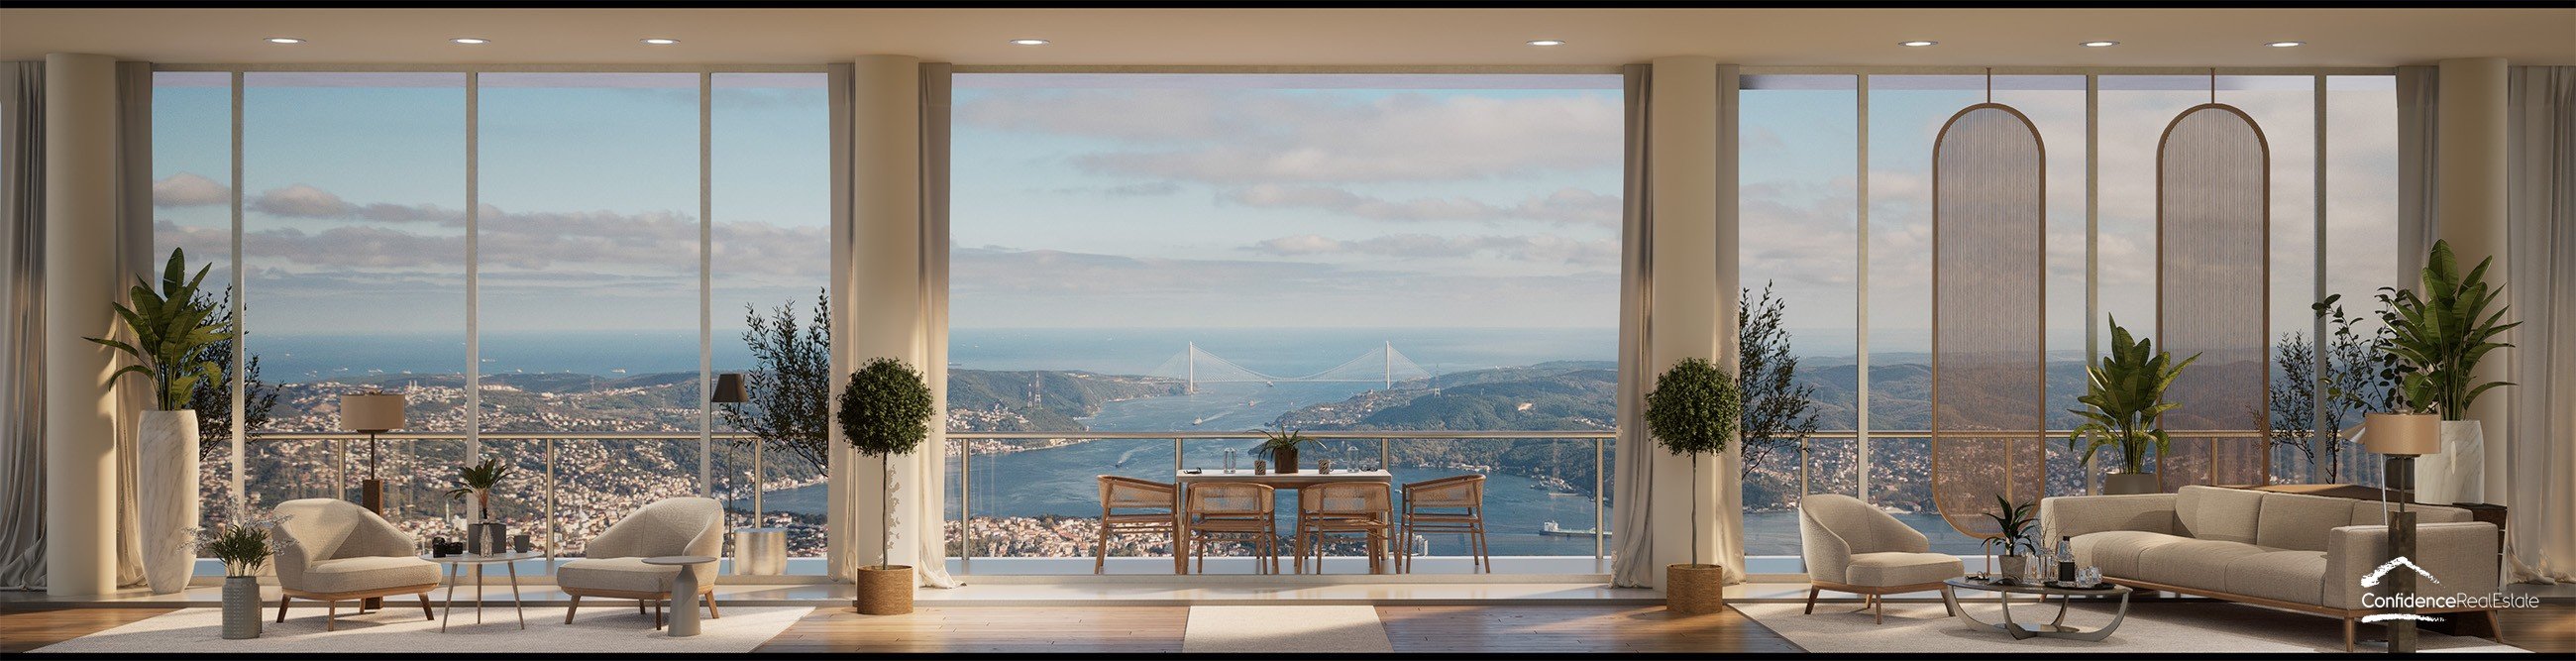 Luxury apartments and offices for sale in Maslak, Istanbul with Bosphorus views